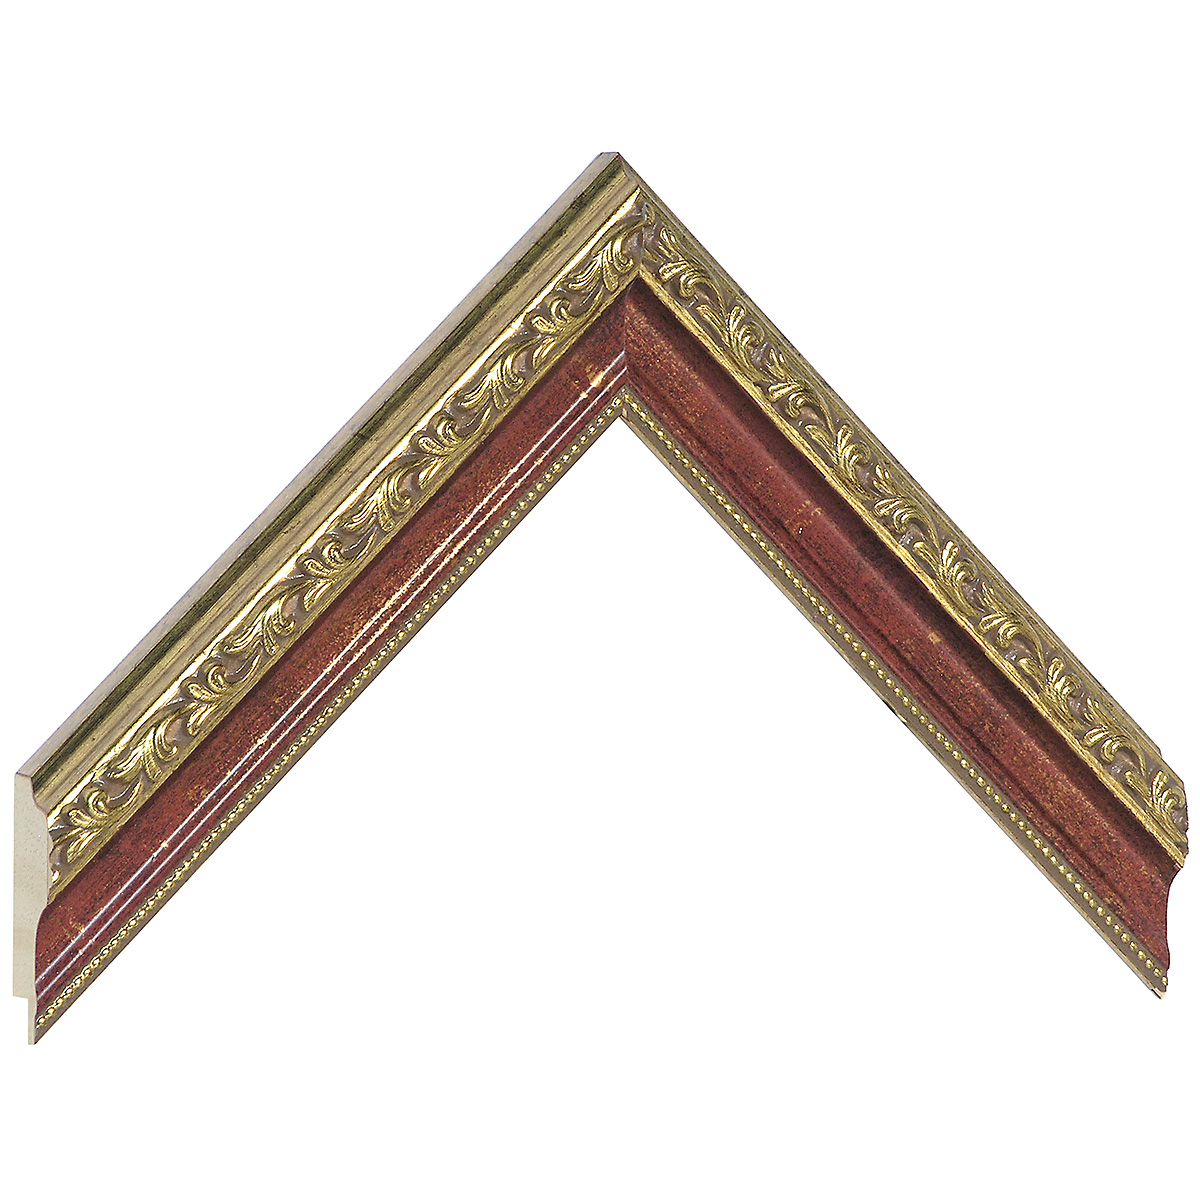 Moulding finger-jointed pine width 32mm - red with gold decorations - Sample